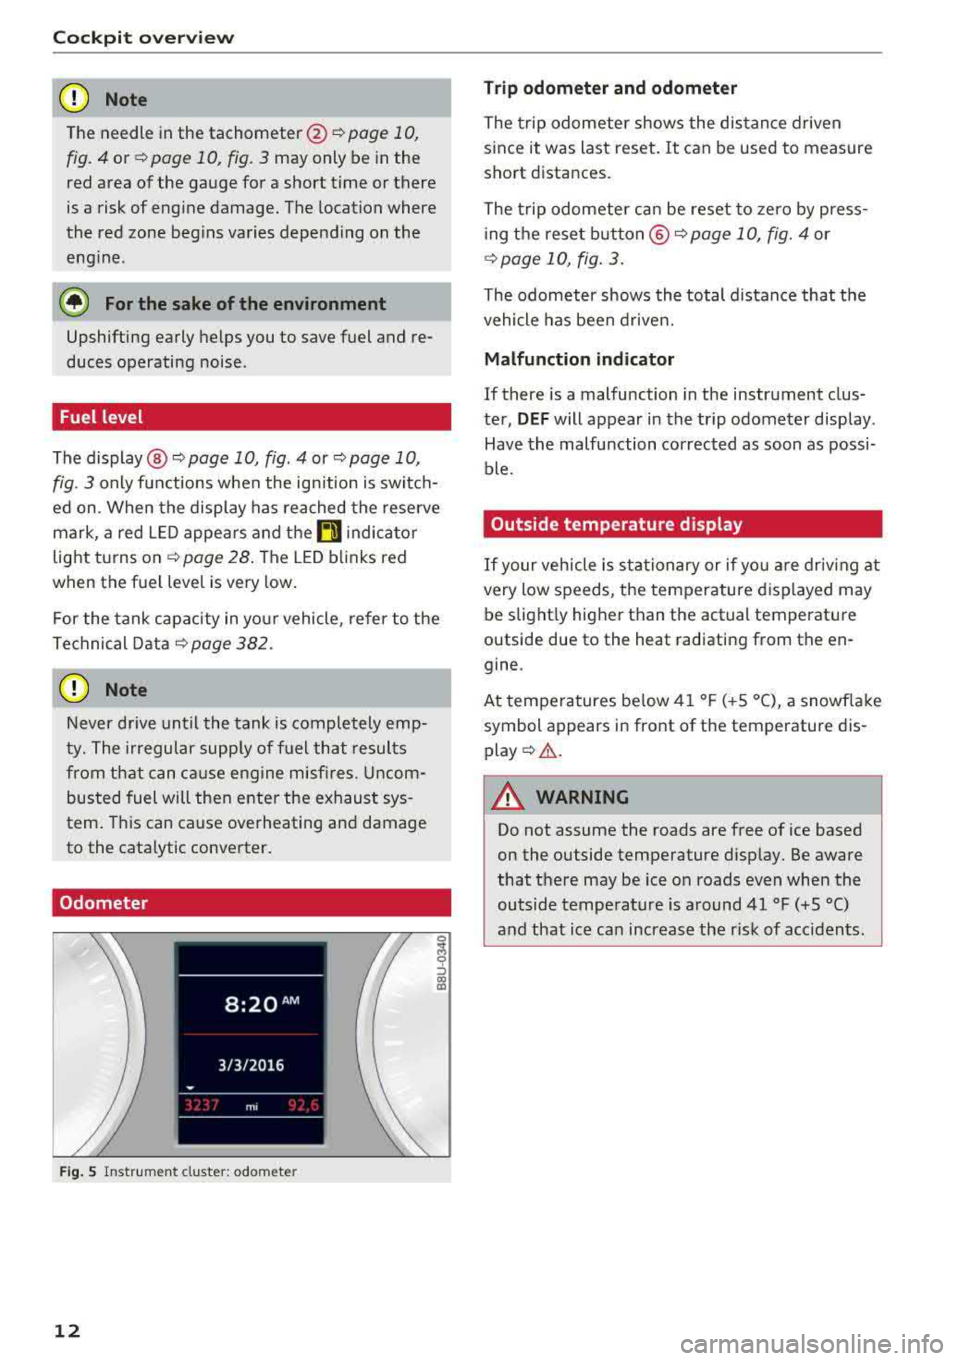 AUDI A3 SEDAN 2018  Owners Manual Cockpit overv iew 
CD Note 
The  needle  in the  tachometer @ Q page 10, 
fig. 4 or¢ page 10, fig. 3 may  only  be  in the 
red  area  of the  gauge  for  a  short  time  or there  
is a  risk of  en